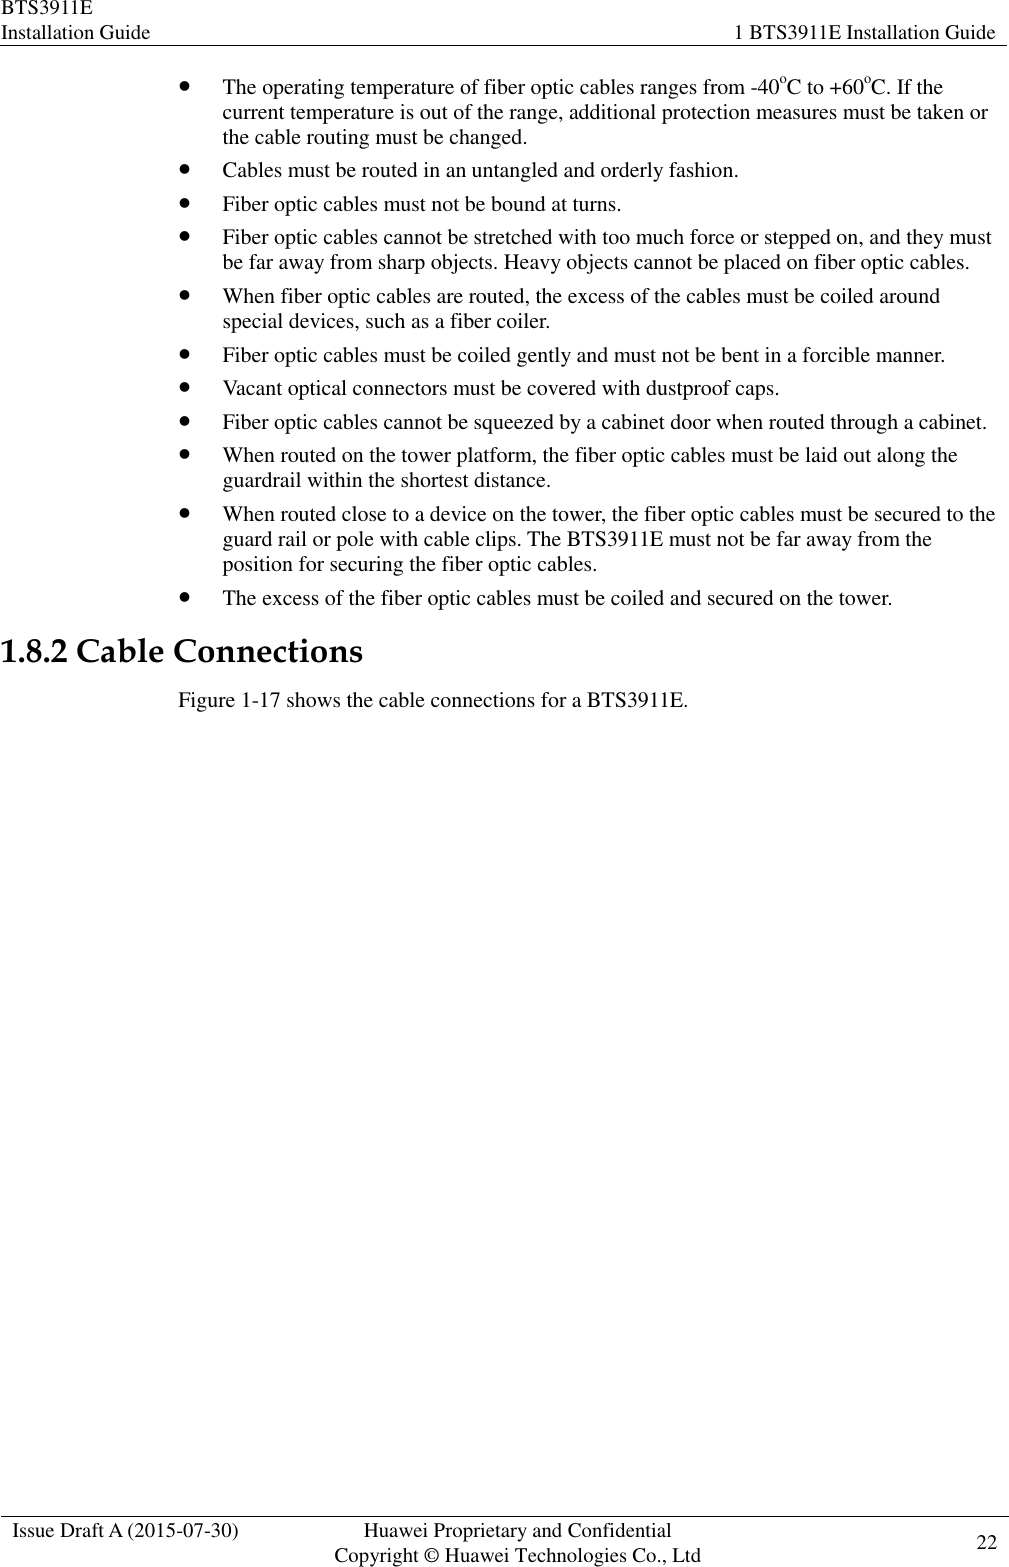 BTS3911E Installation Guide 1 BTS3911E Installation Guide  Issue Draft A (2015-07-30) Huawei Proprietary and Confidential           Copyright © Huawei Technologies Co., Ltd 22     The operating temperature of fiber optic cables ranges from -40oC to +60oC. If the current temperature is out of the range, additional protection measures must be taken or the cable routing must be changed.  Cables must be routed in an untangled and orderly fashion.  Fiber optic cables must not be bound at turns.  Fiber optic cables cannot be stretched with too much force or stepped on, and they must be far away from sharp objects. Heavy objects cannot be placed on fiber optic cables.  When fiber optic cables are routed, the excess of the cables must be coiled around special devices, such as a fiber coiler.  Fiber optic cables must be coiled gently and must not be bent in a forcible manner.  Vacant optical connectors must be covered with dustproof caps.  Fiber optic cables cannot be squeezed by a cabinet door when routed through a cabinet.  When routed on the tower platform, the fiber optic cables must be laid out along the guardrail within the shortest distance.  When routed close to a device on the tower, the fiber optic cables must be secured to the guard rail or pole with cable clips. The BTS3911E must not be far away from the position for securing the fiber optic cables.  The excess of the fiber optic cables must be coiled and secured on the tower. 1.8.2 Cable Connections Figure 1-17 shows the cable connections for a BTS3911E. 